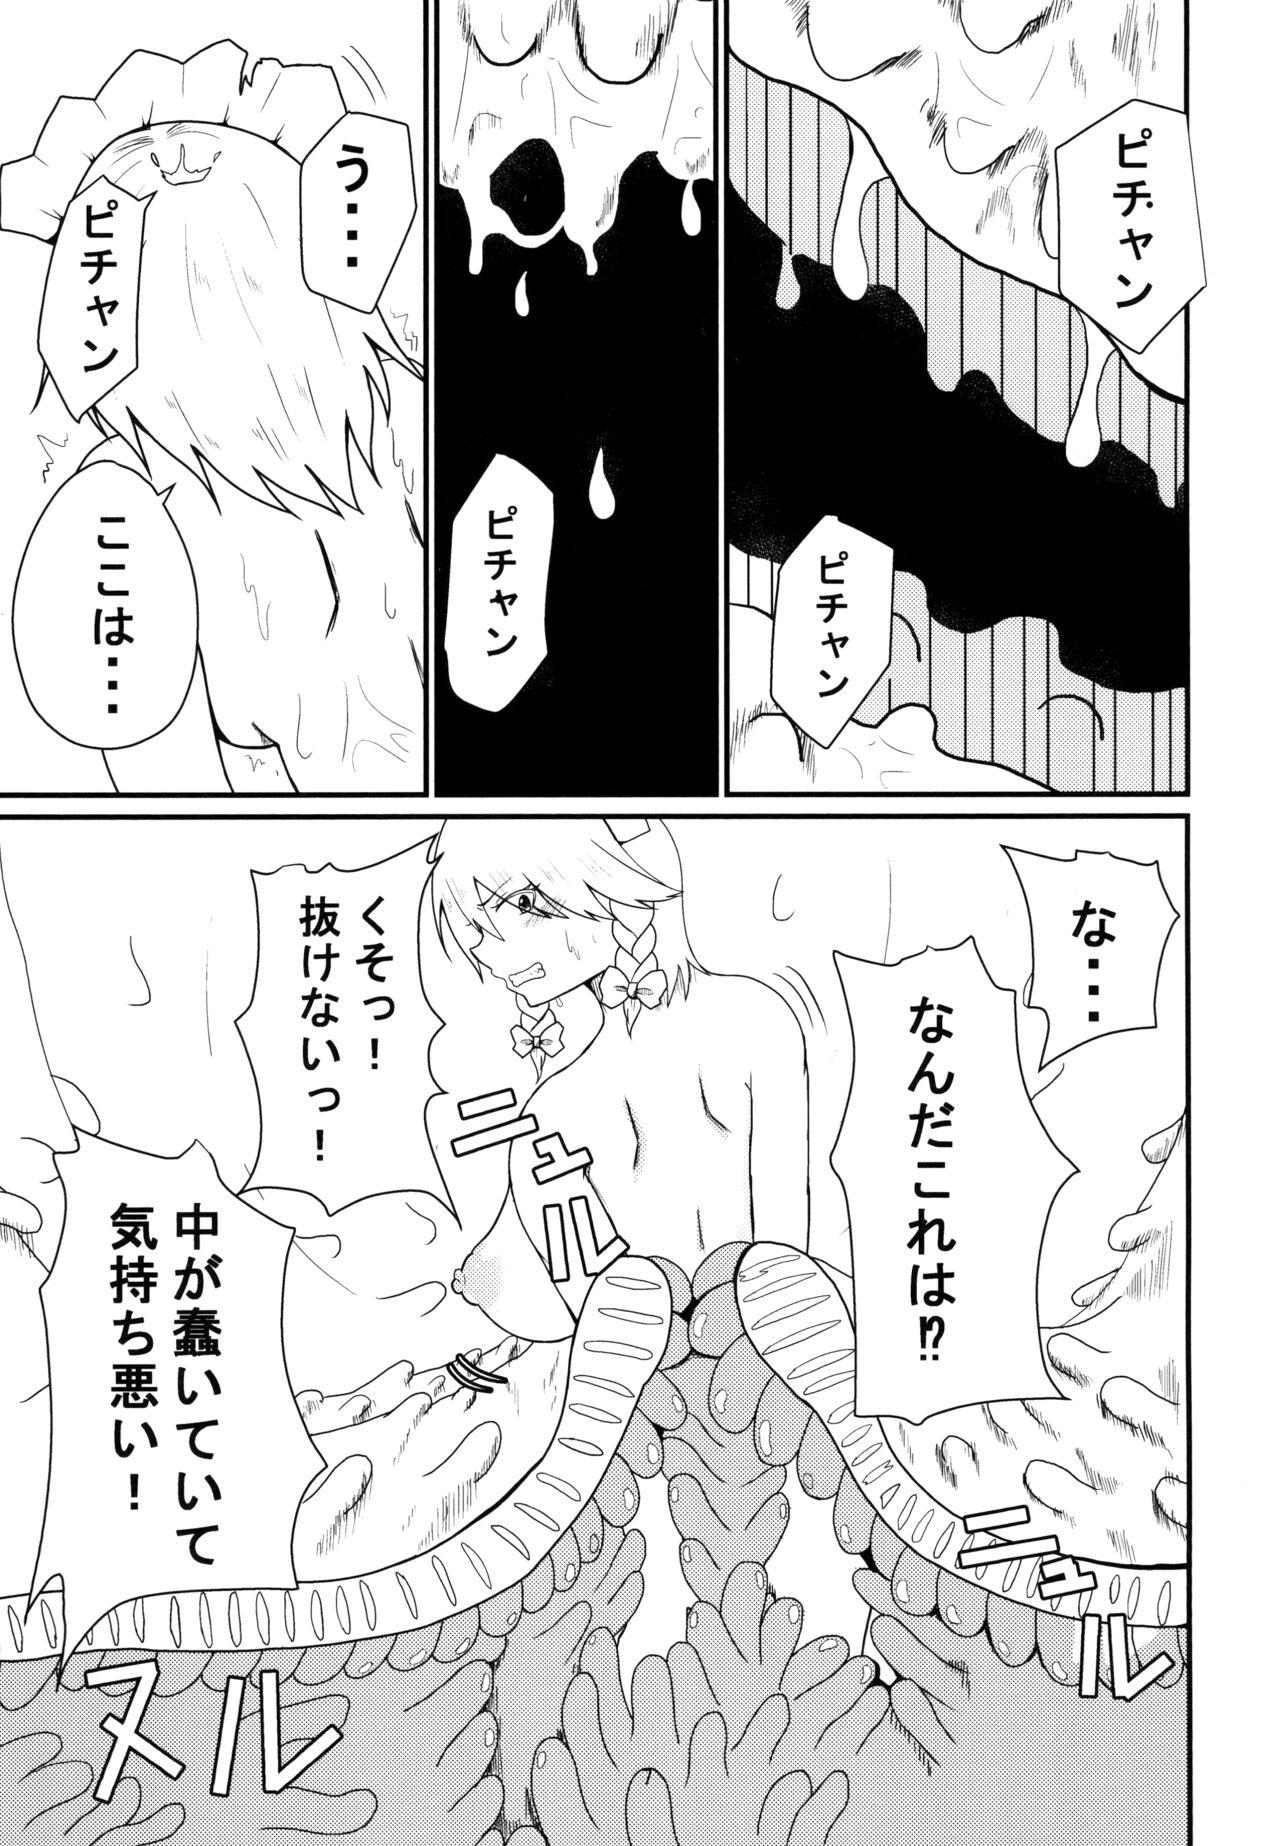 Rough Sex 呑まれて咲夜さん - Touhou project Sexcams - Page 7